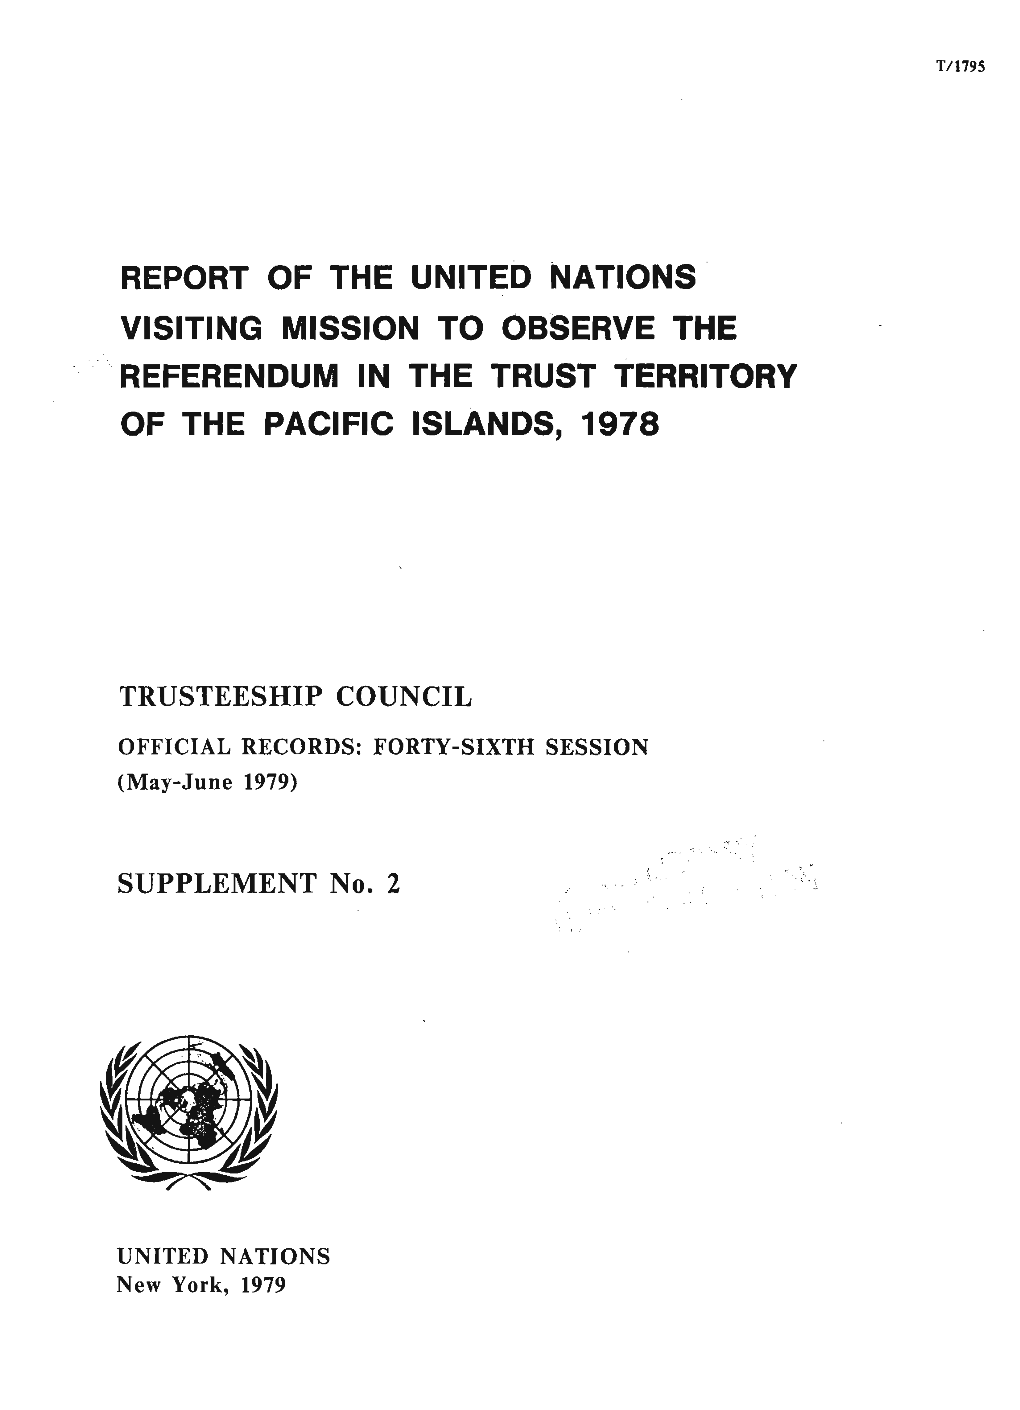 Report of the United Nations Visiting Mission to Observe the Referendum in the Trust Territory of the Pacific Islands, 1978